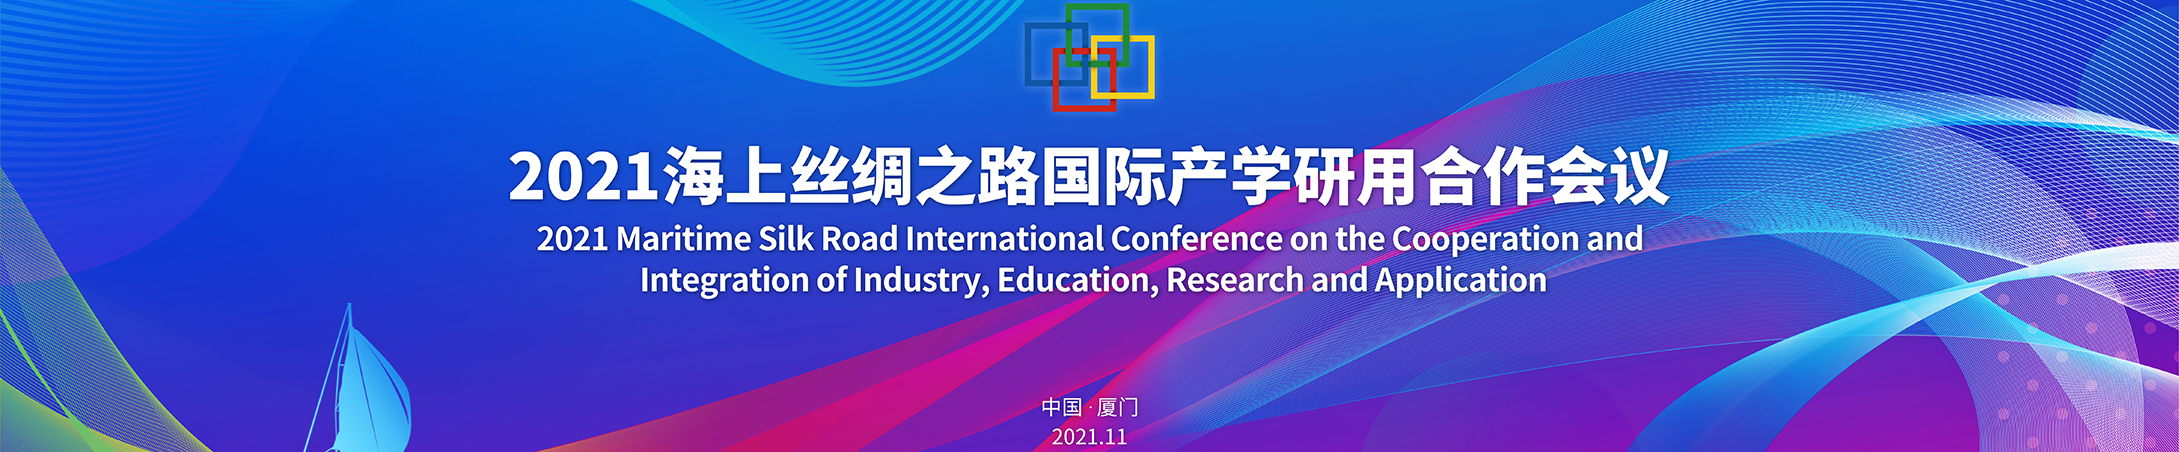 2021 Maritime Silk Road International Conference on the Cooperation  and Integration of Industry, Education, Research and Application